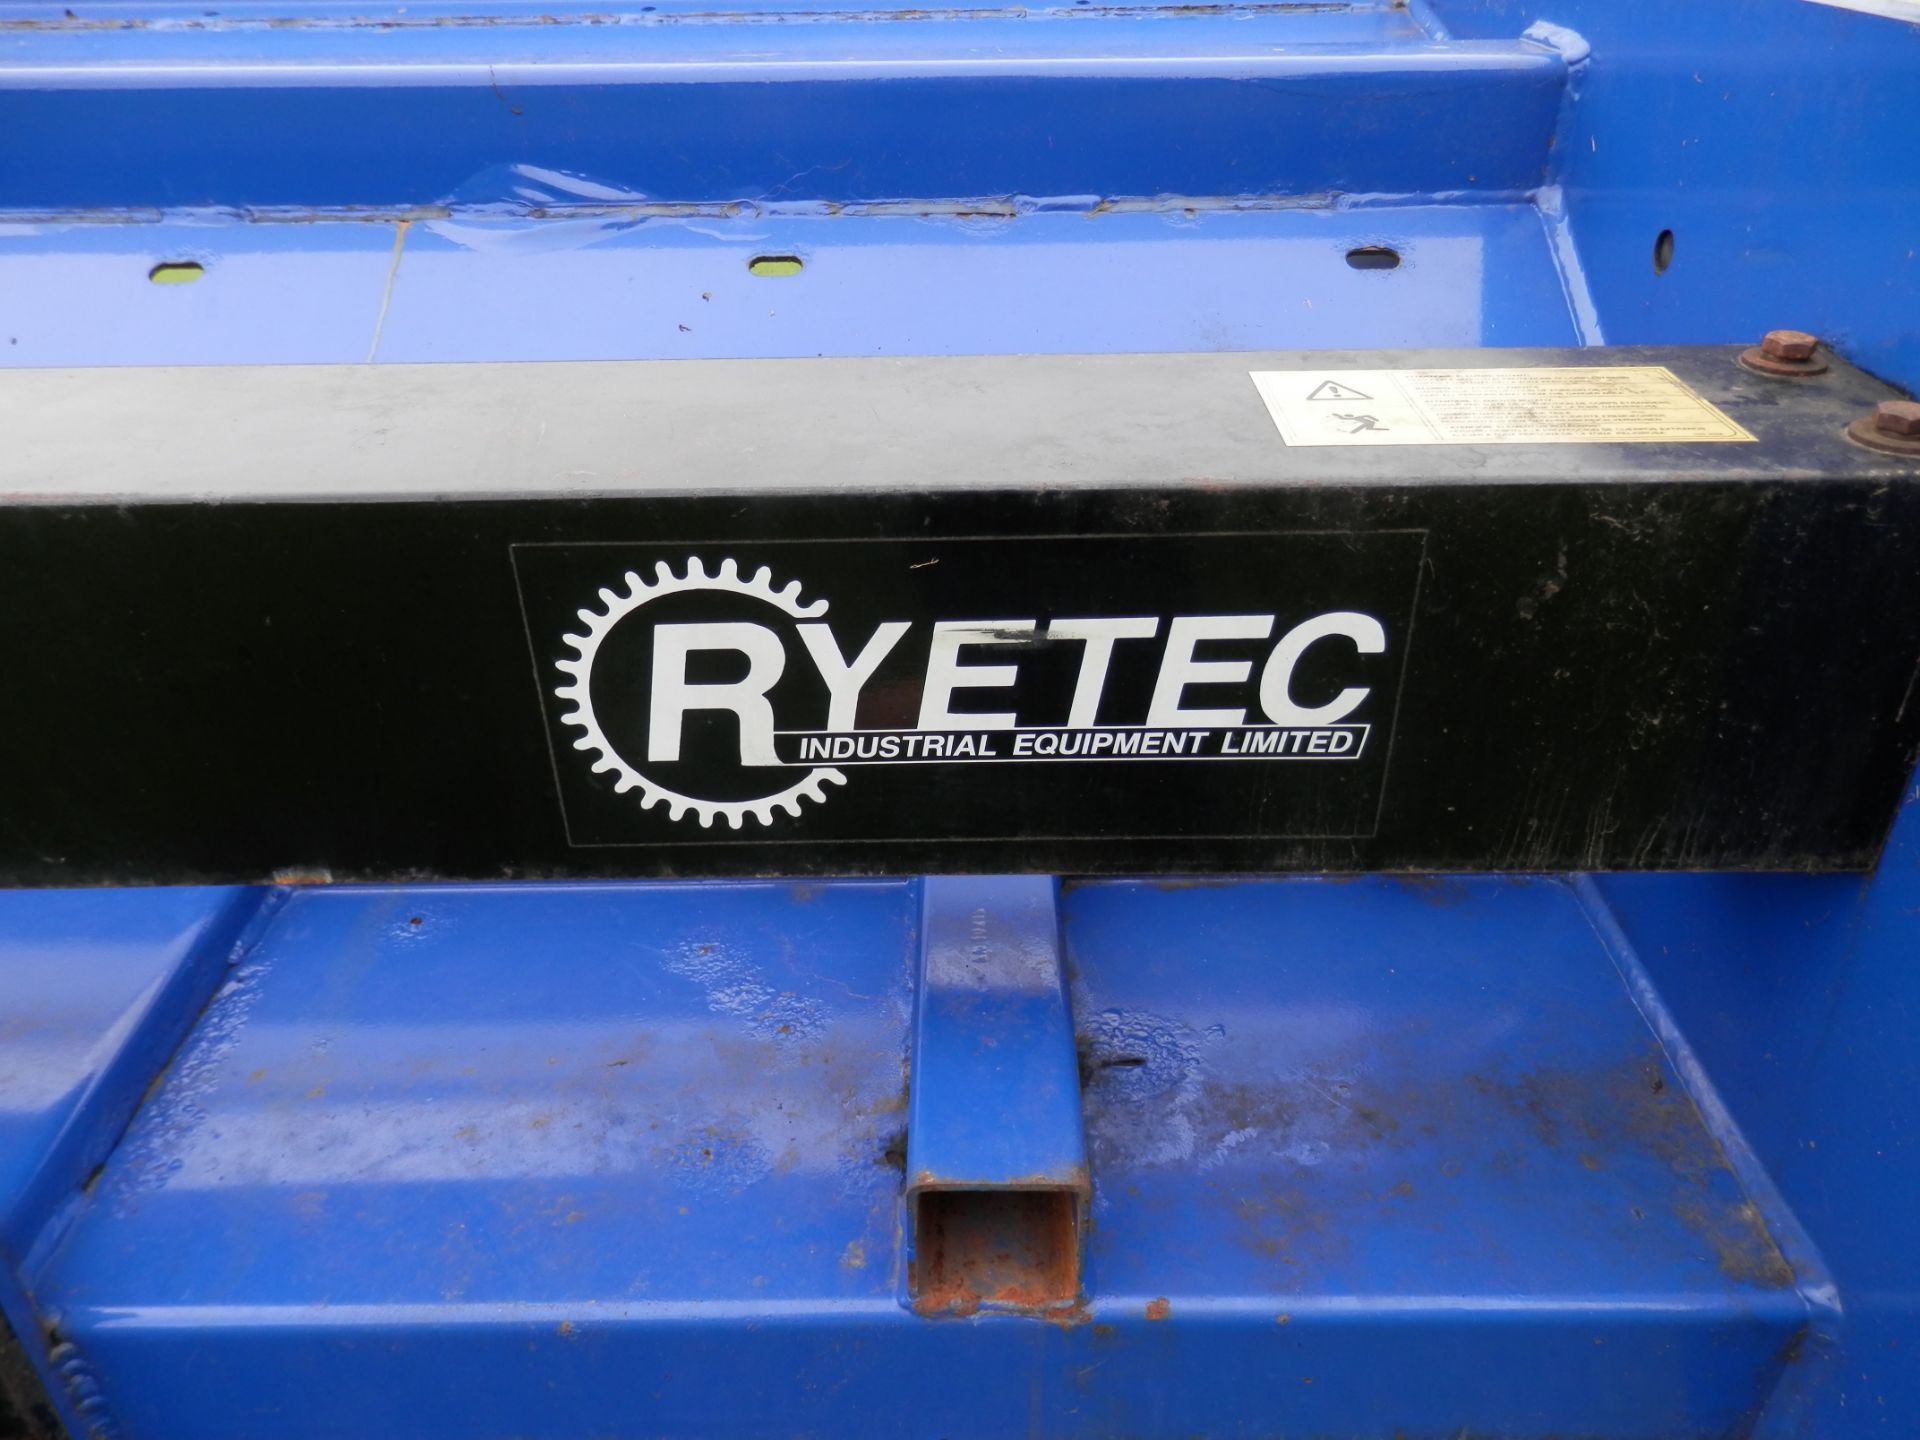 RYETEC FLAIL TSN TOPPER/SHREDDER ATTACHMENT FOR LARGE TRACTOR, WILL EAT EVERYTHING IN ITS PATH ! - Image 6 of 11